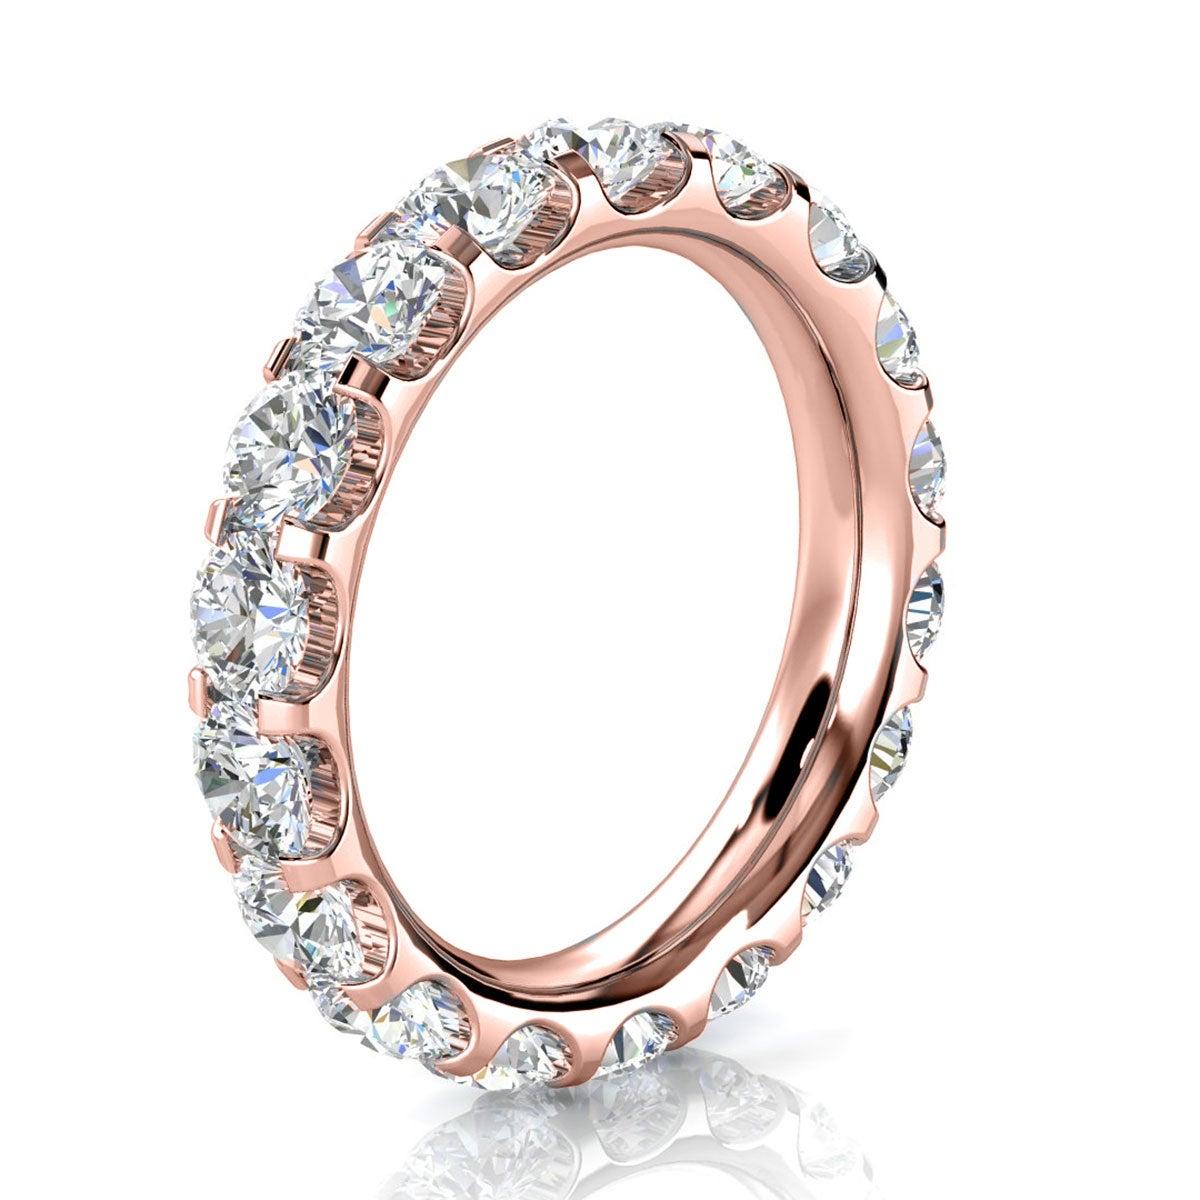 For Sale:  18K Rose Gold Viola Eternity Micro-Prong Diamond Ring '3 Ct. tw' 2